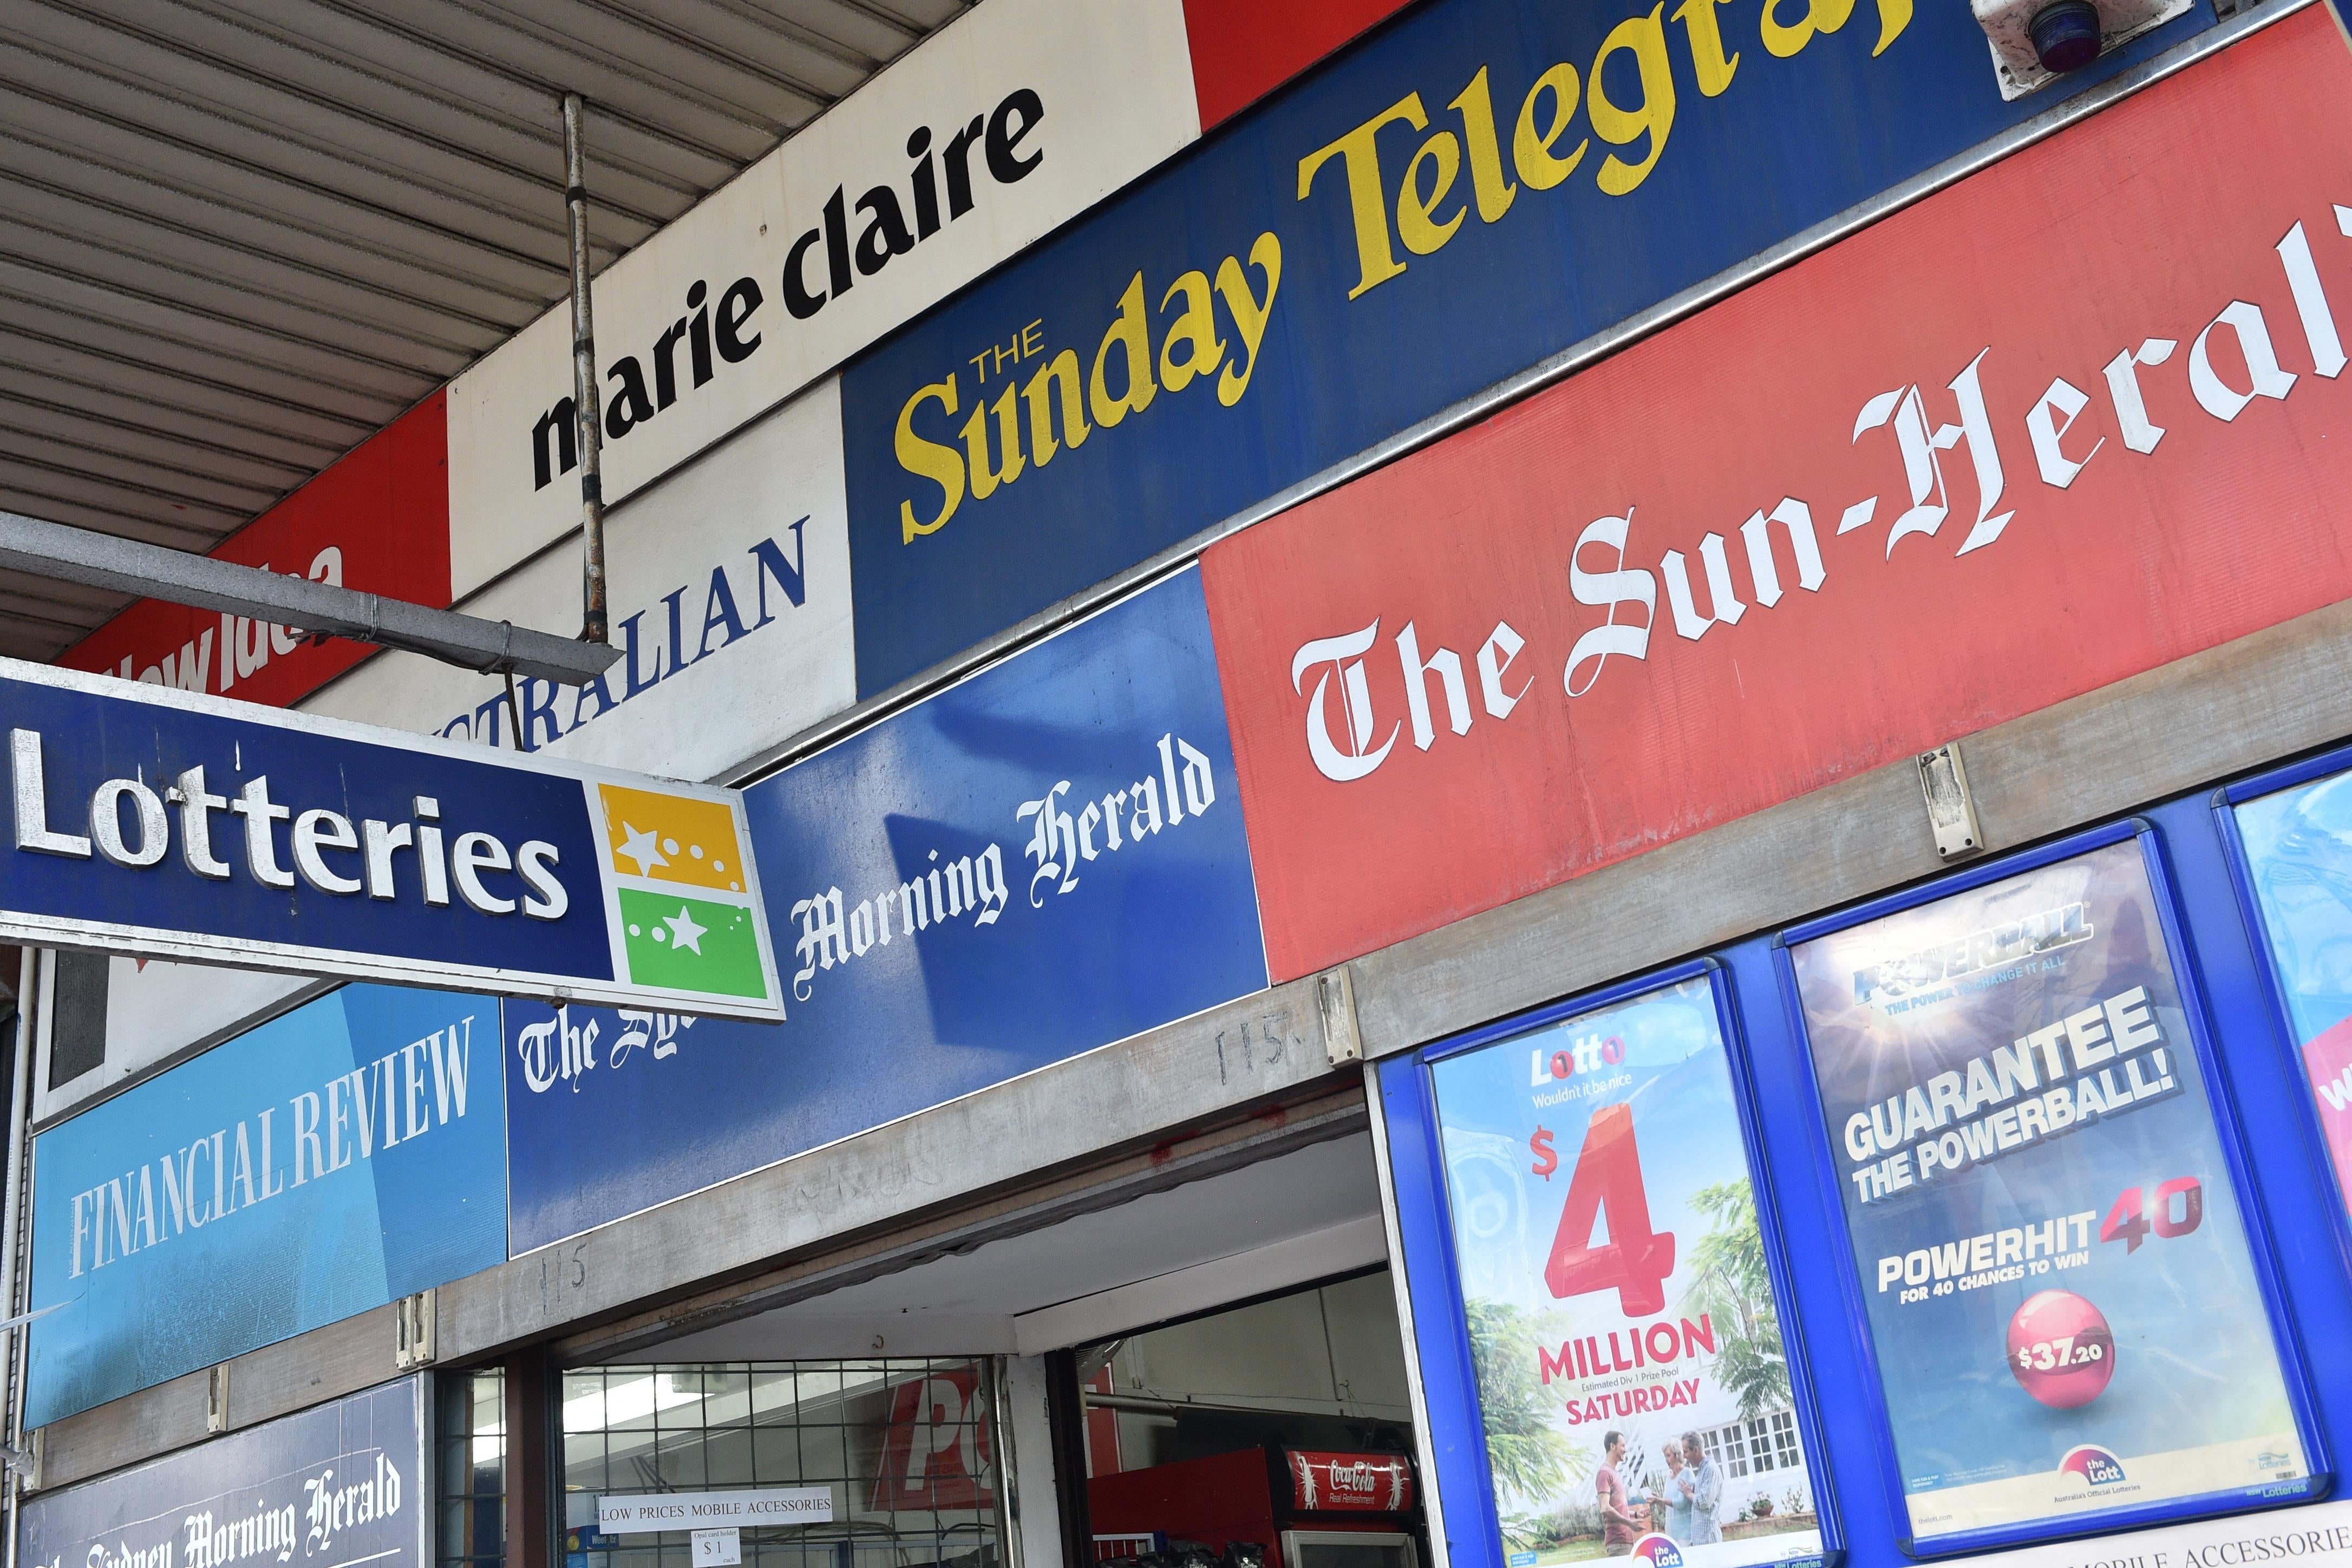 Advertisements for the Sydney Morning Herald, the Sun-Herald, the Sunday Telegraph, and other Australia publications are seen on a building.